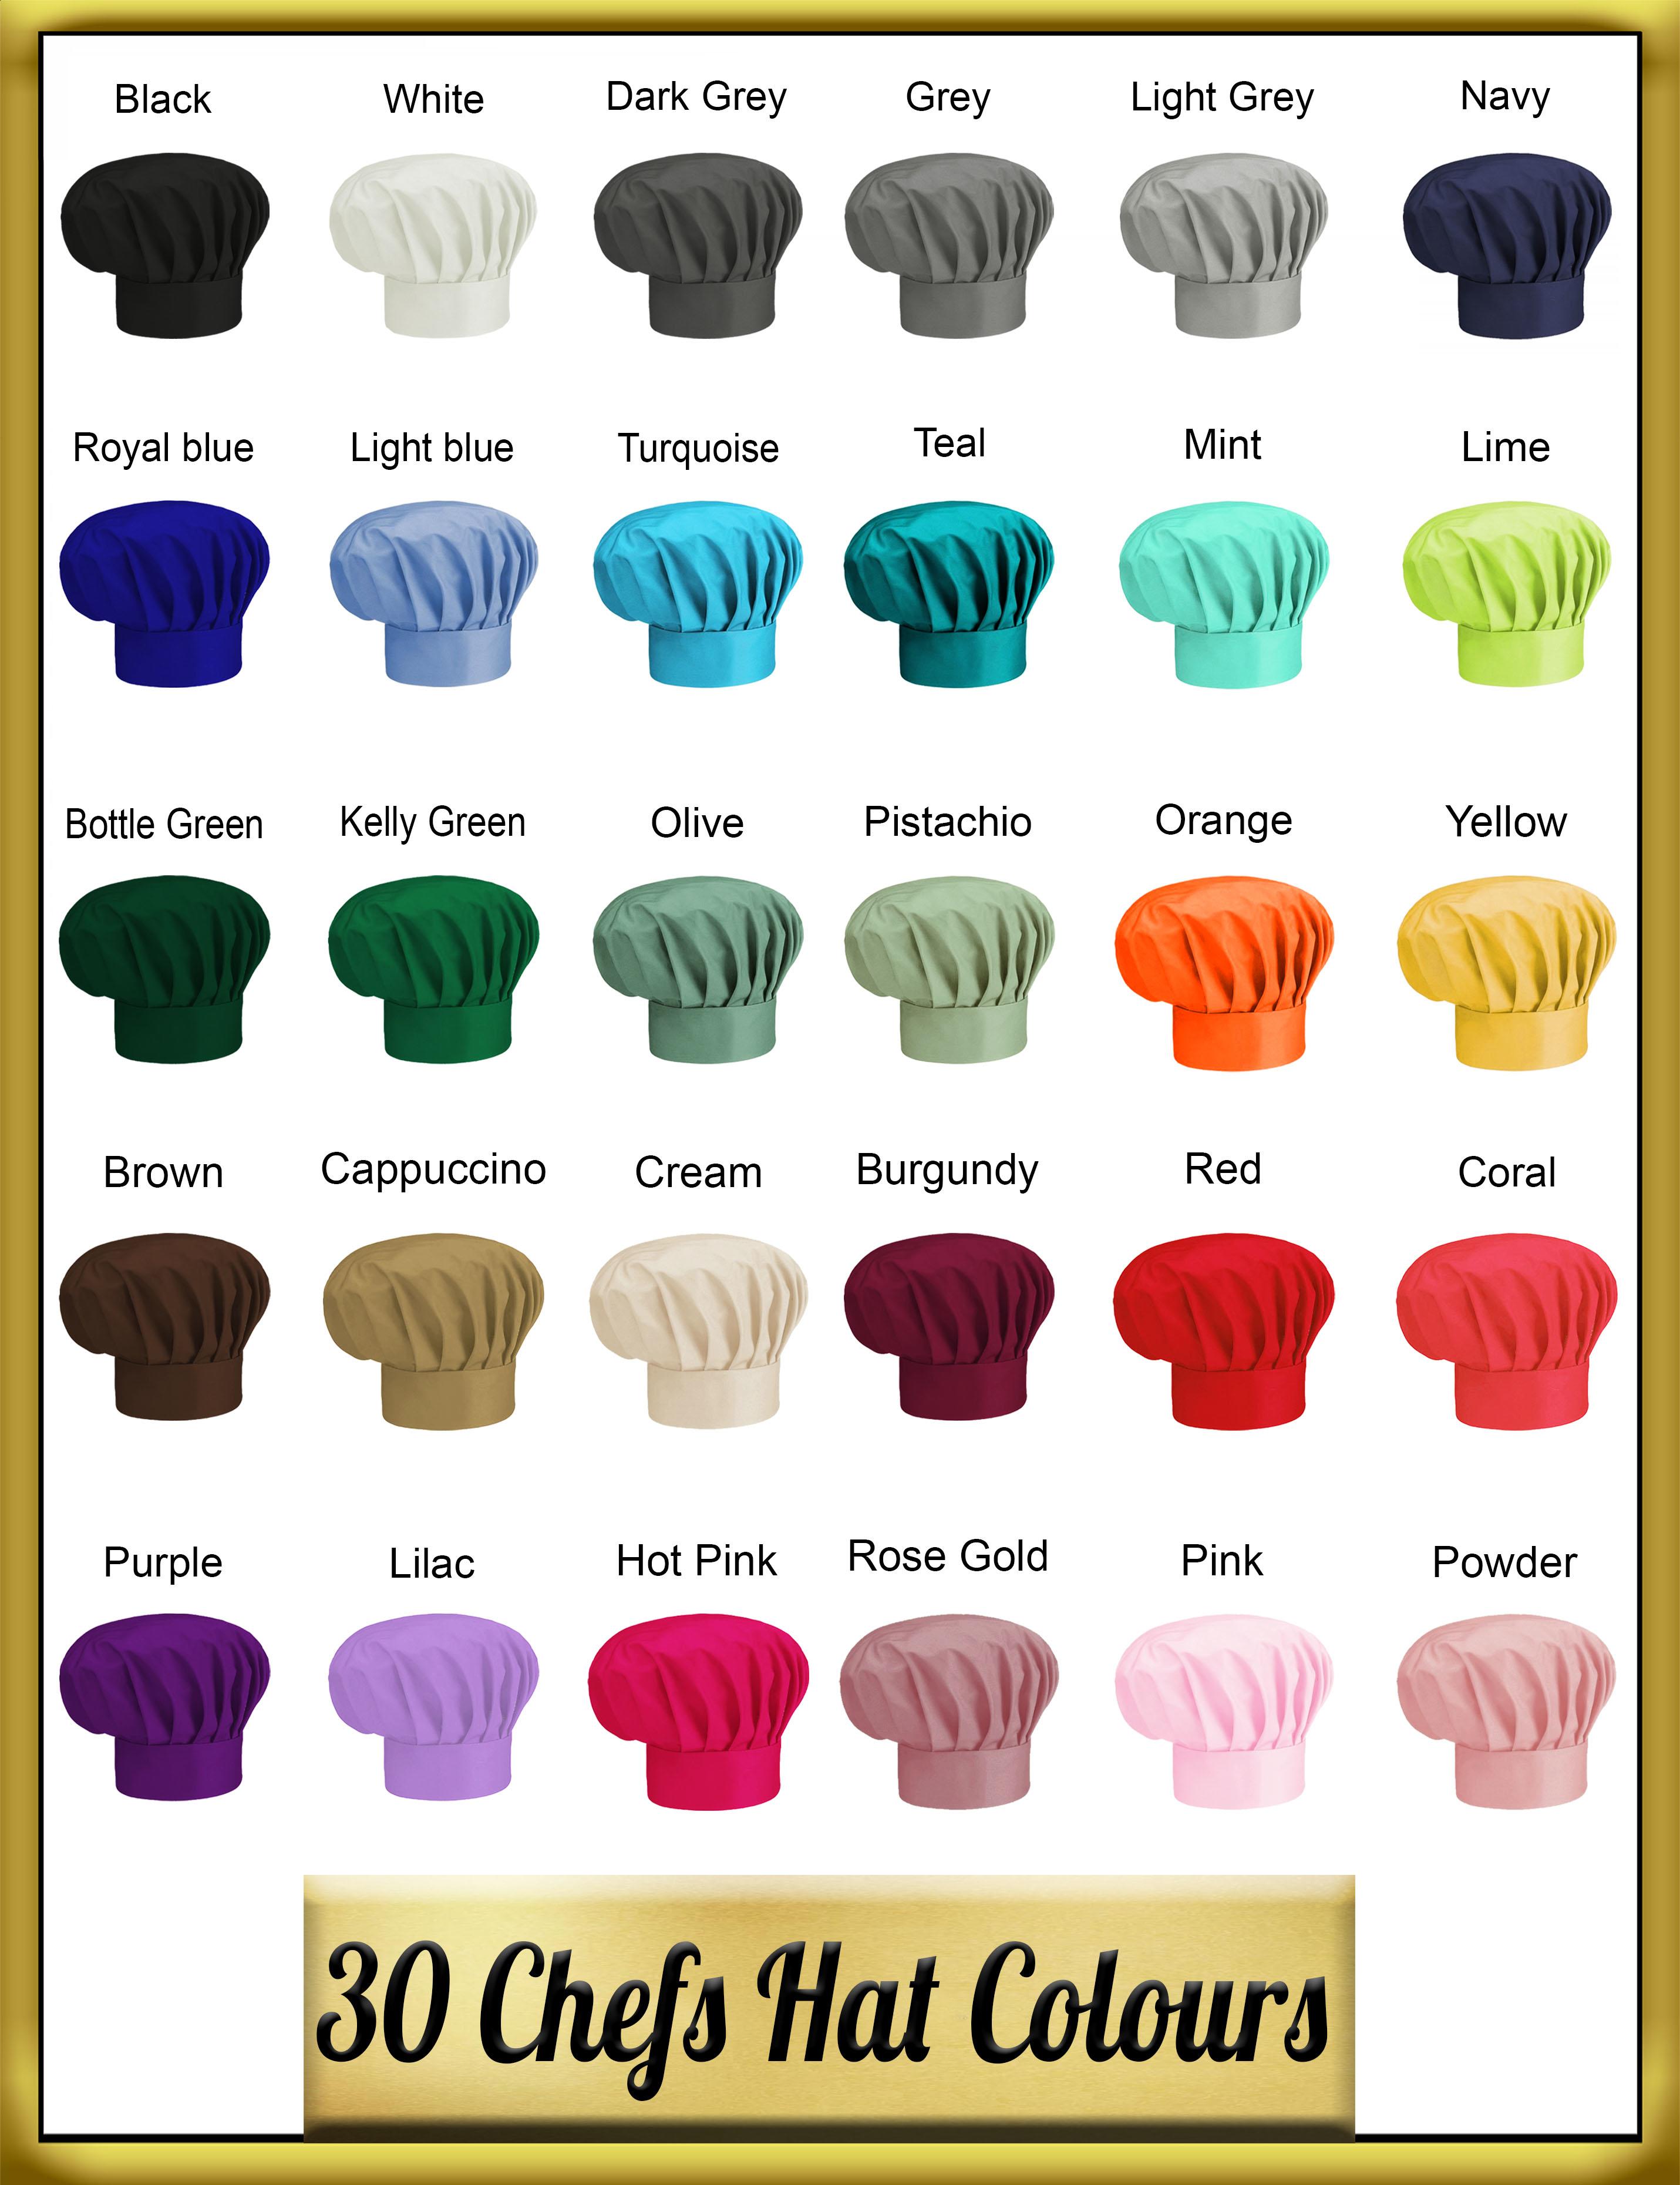 Baker chef hat Printed colours